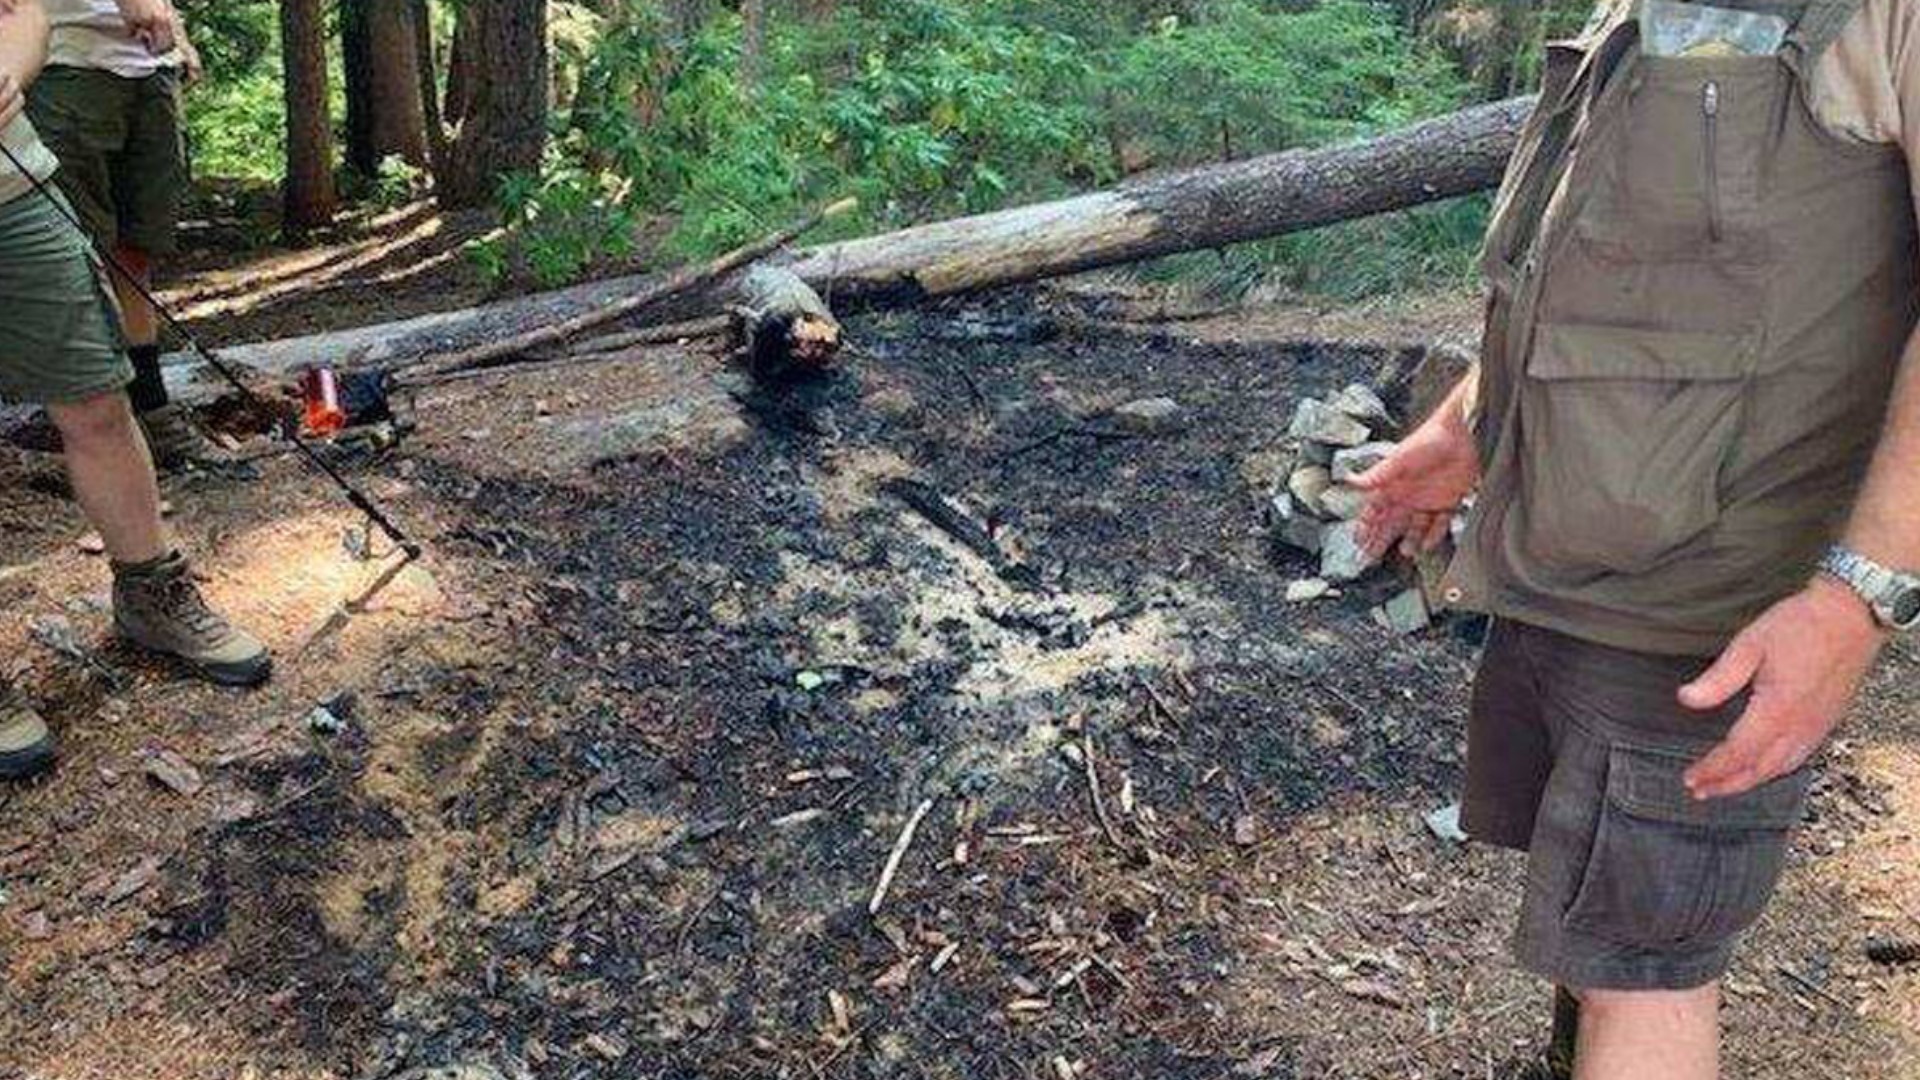 Boy Scout Troop 50 from Stayton, Oregon is getting credit for preventing a wildfire in the Willamette National Forest near Waldo Lake. The boys spotted a smoldering camp fire and created a "bucket brigade" to douse it with water.